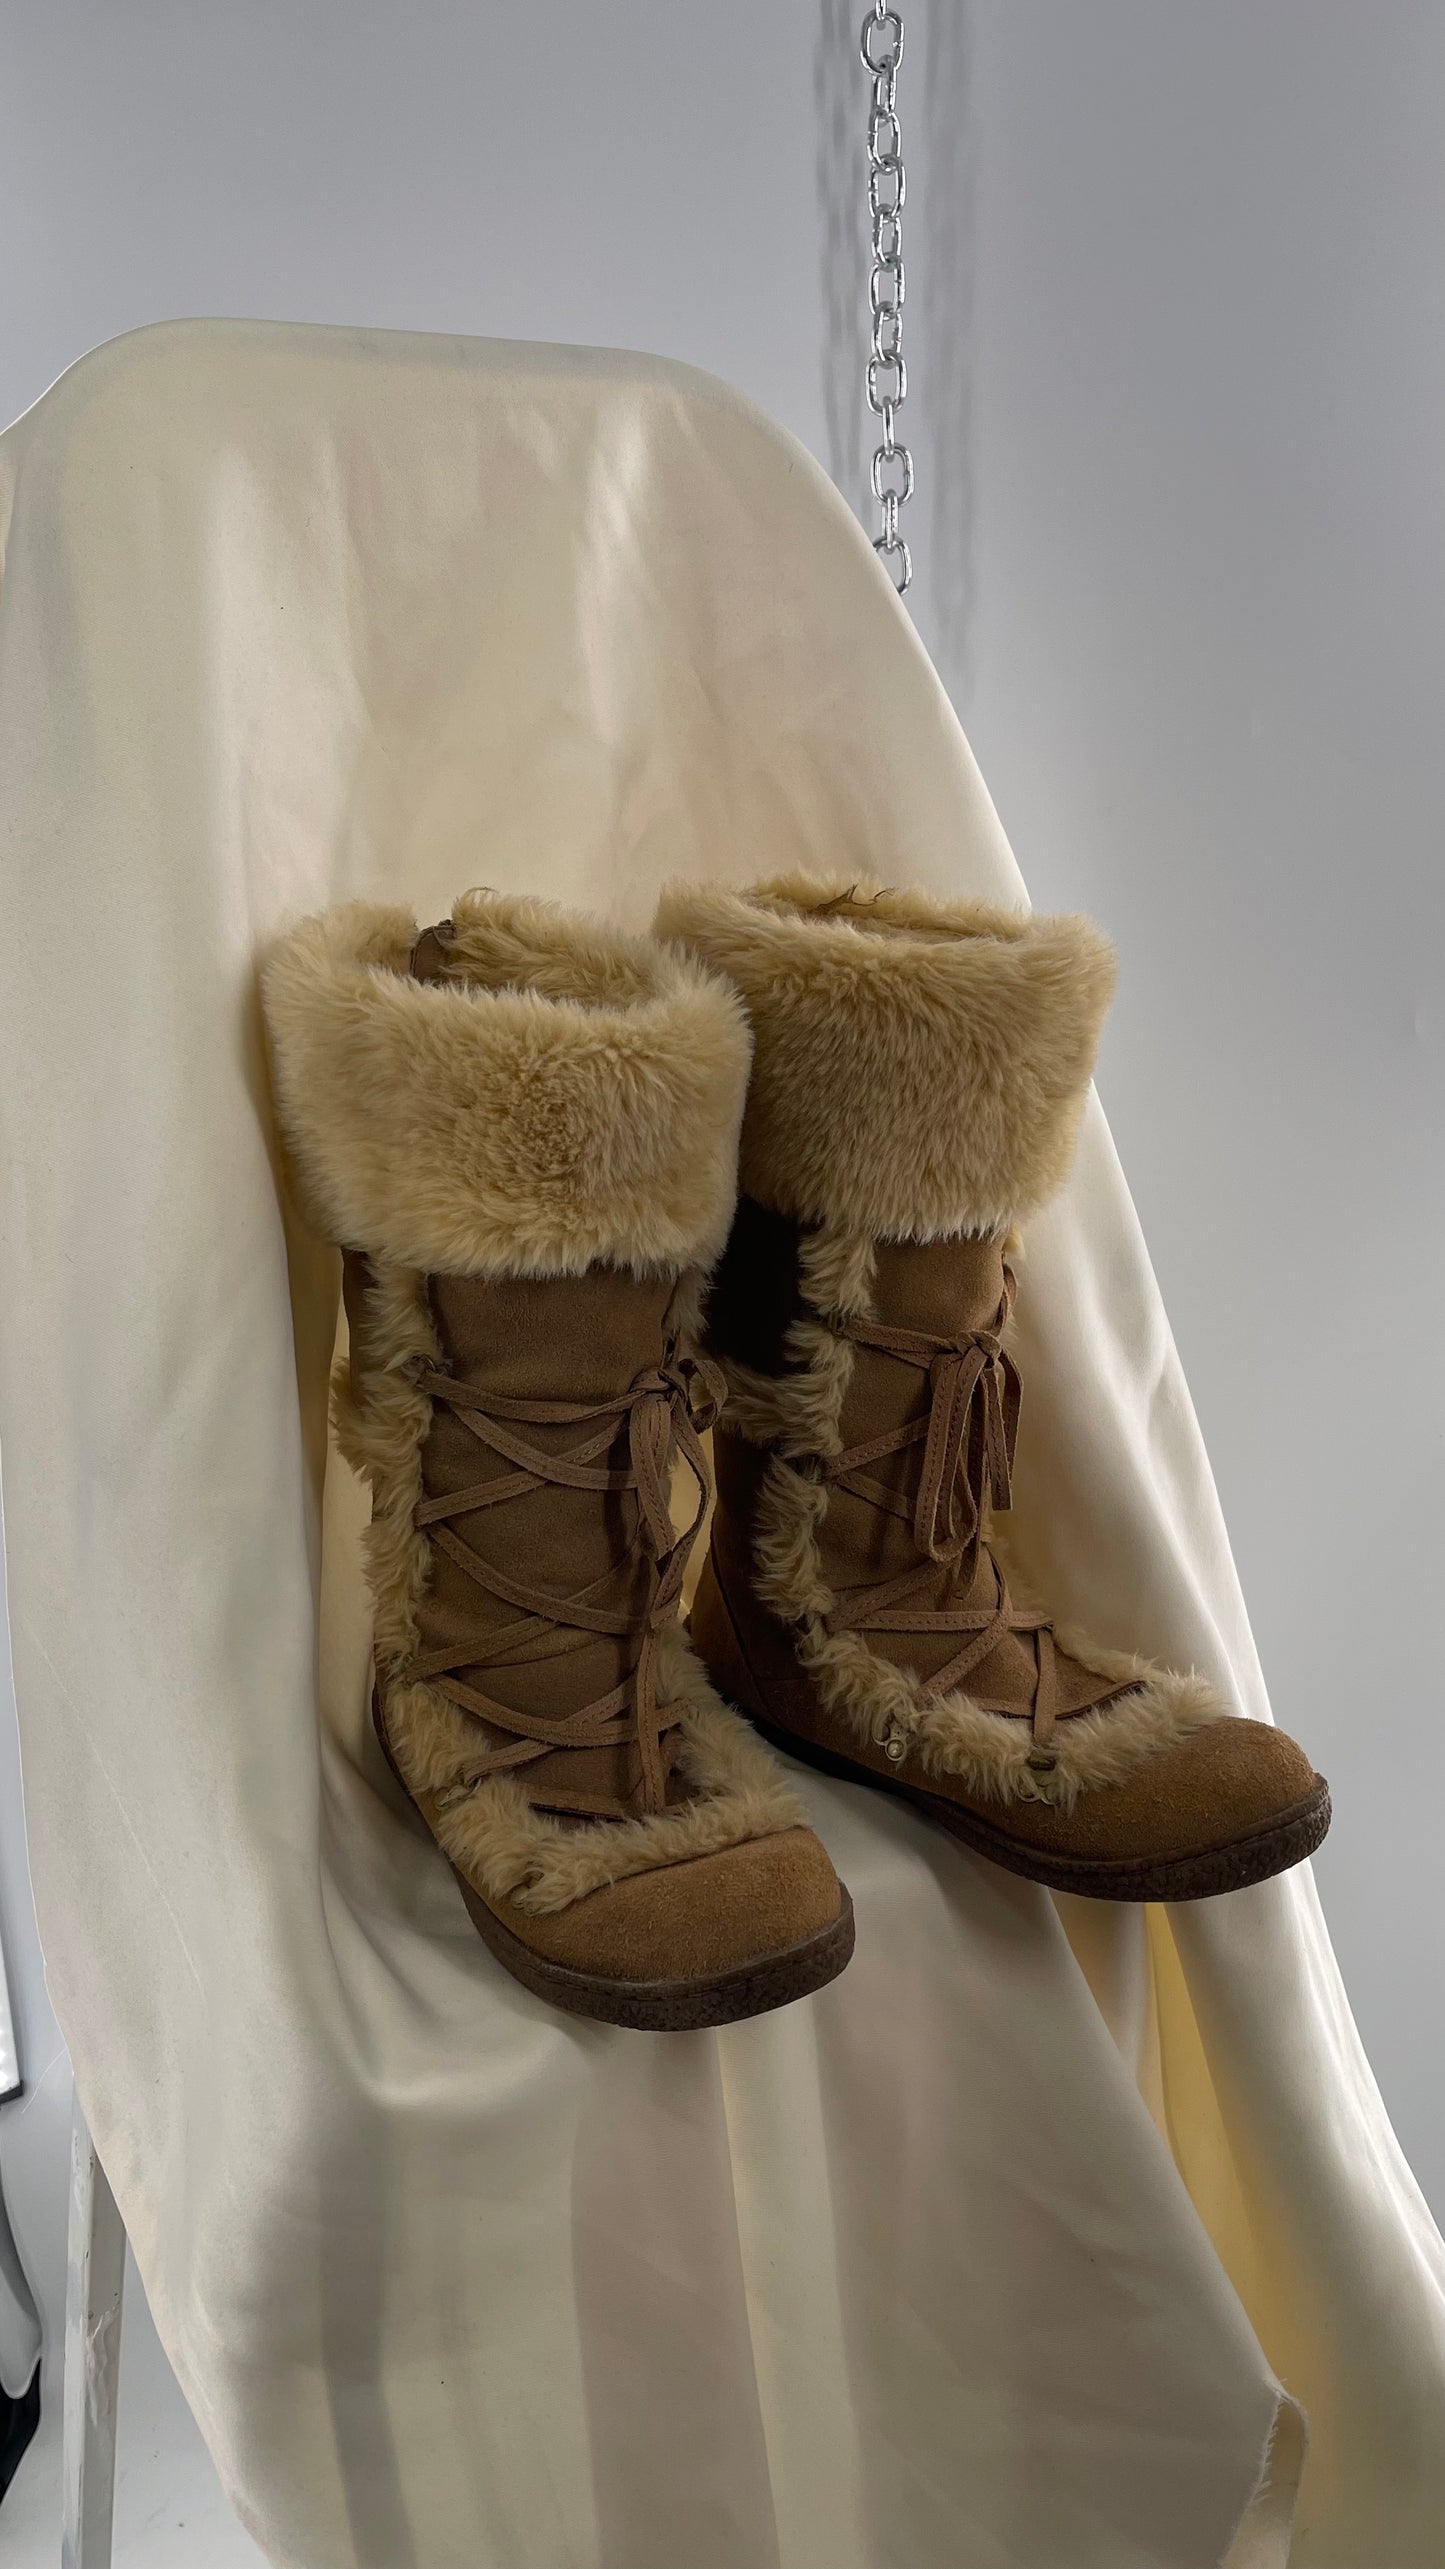 Vintage GAP Tan Suede Leather Eskimo Tie Up Boot with Faux Fur Trim Piping (5)